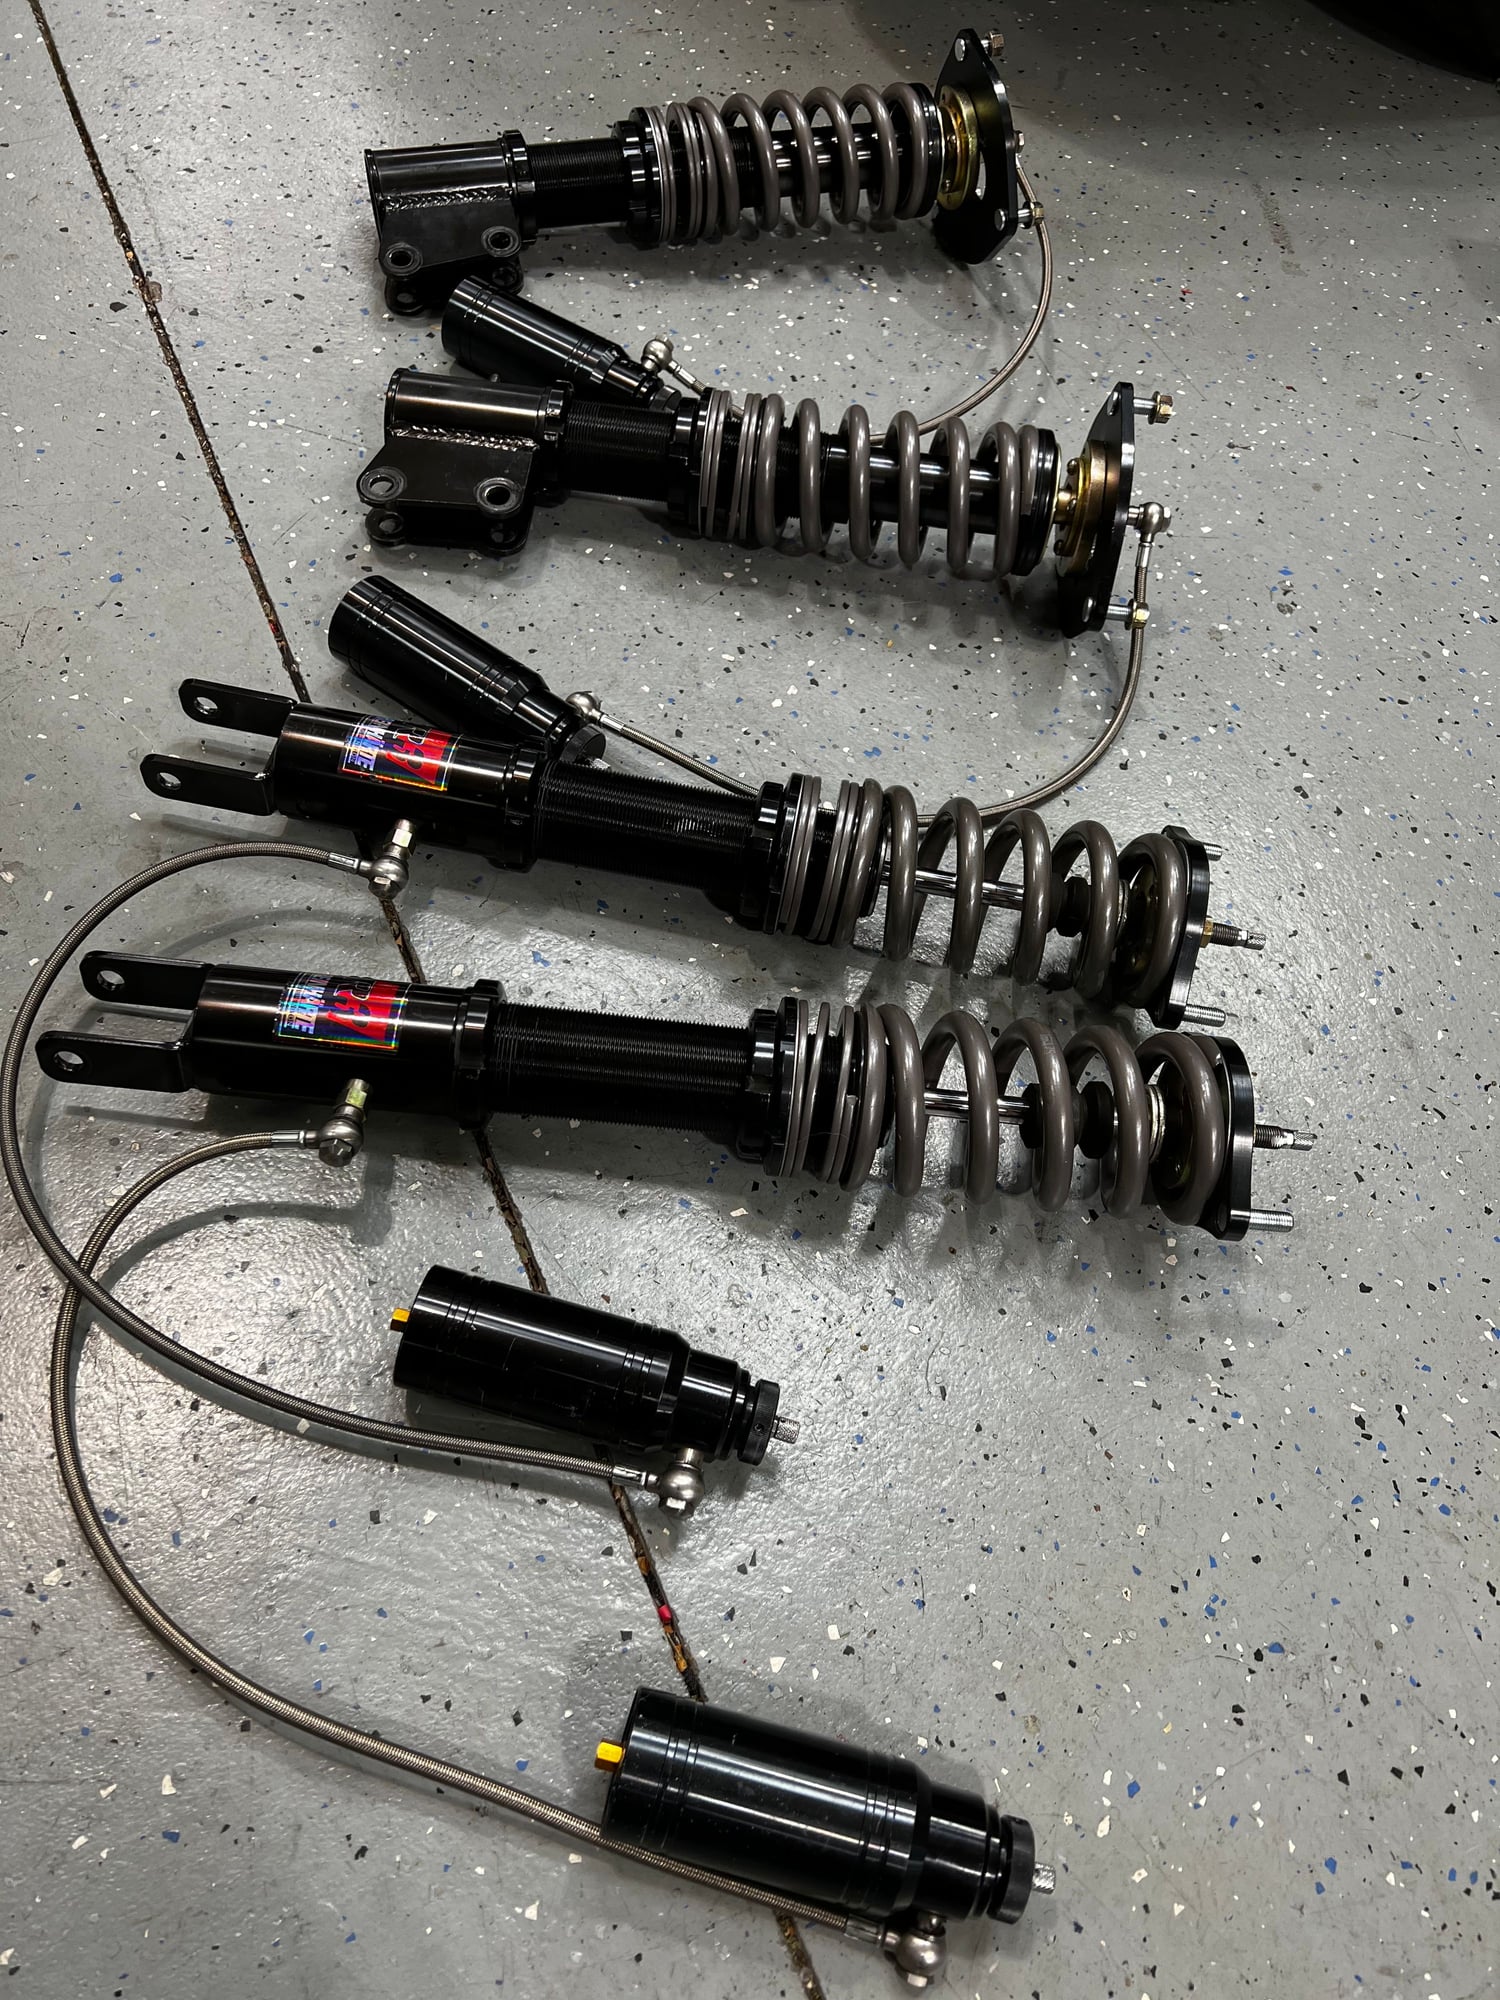 Steering/Suspension - FS: Reinharte R3 triple adjustable coilovers for 8/9 - Used - 2003 to 2006 Mitsubishi Lancer Evolution - Boise, ID 83709, United States